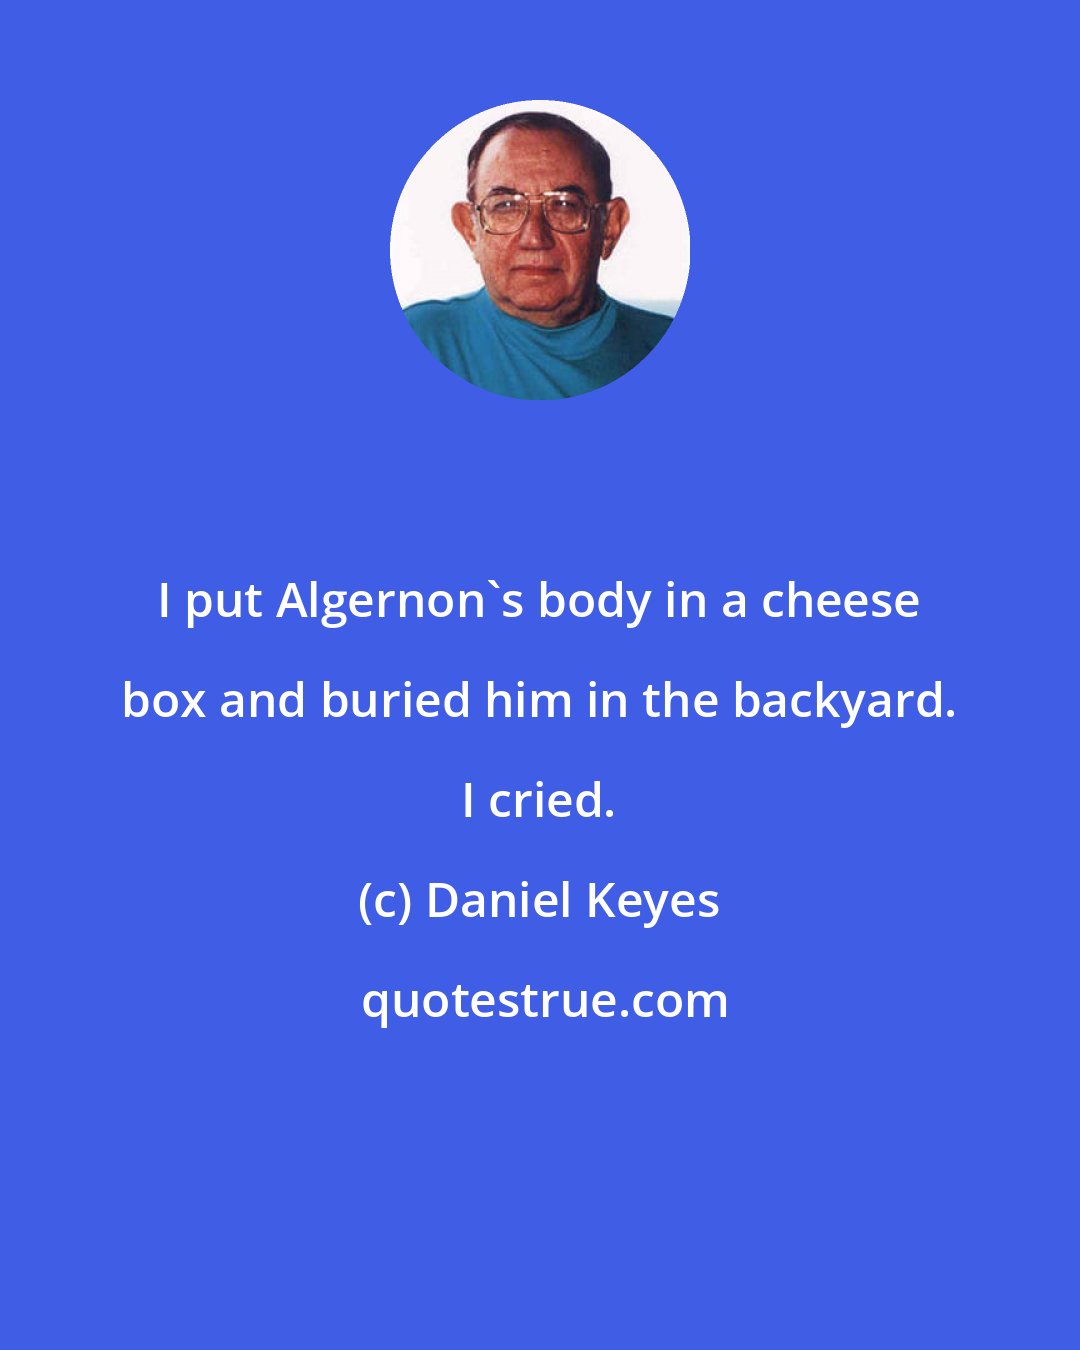 Daniel Keyes: I put Algernon's body in a cheese box and buried him in the backyard. I cried.